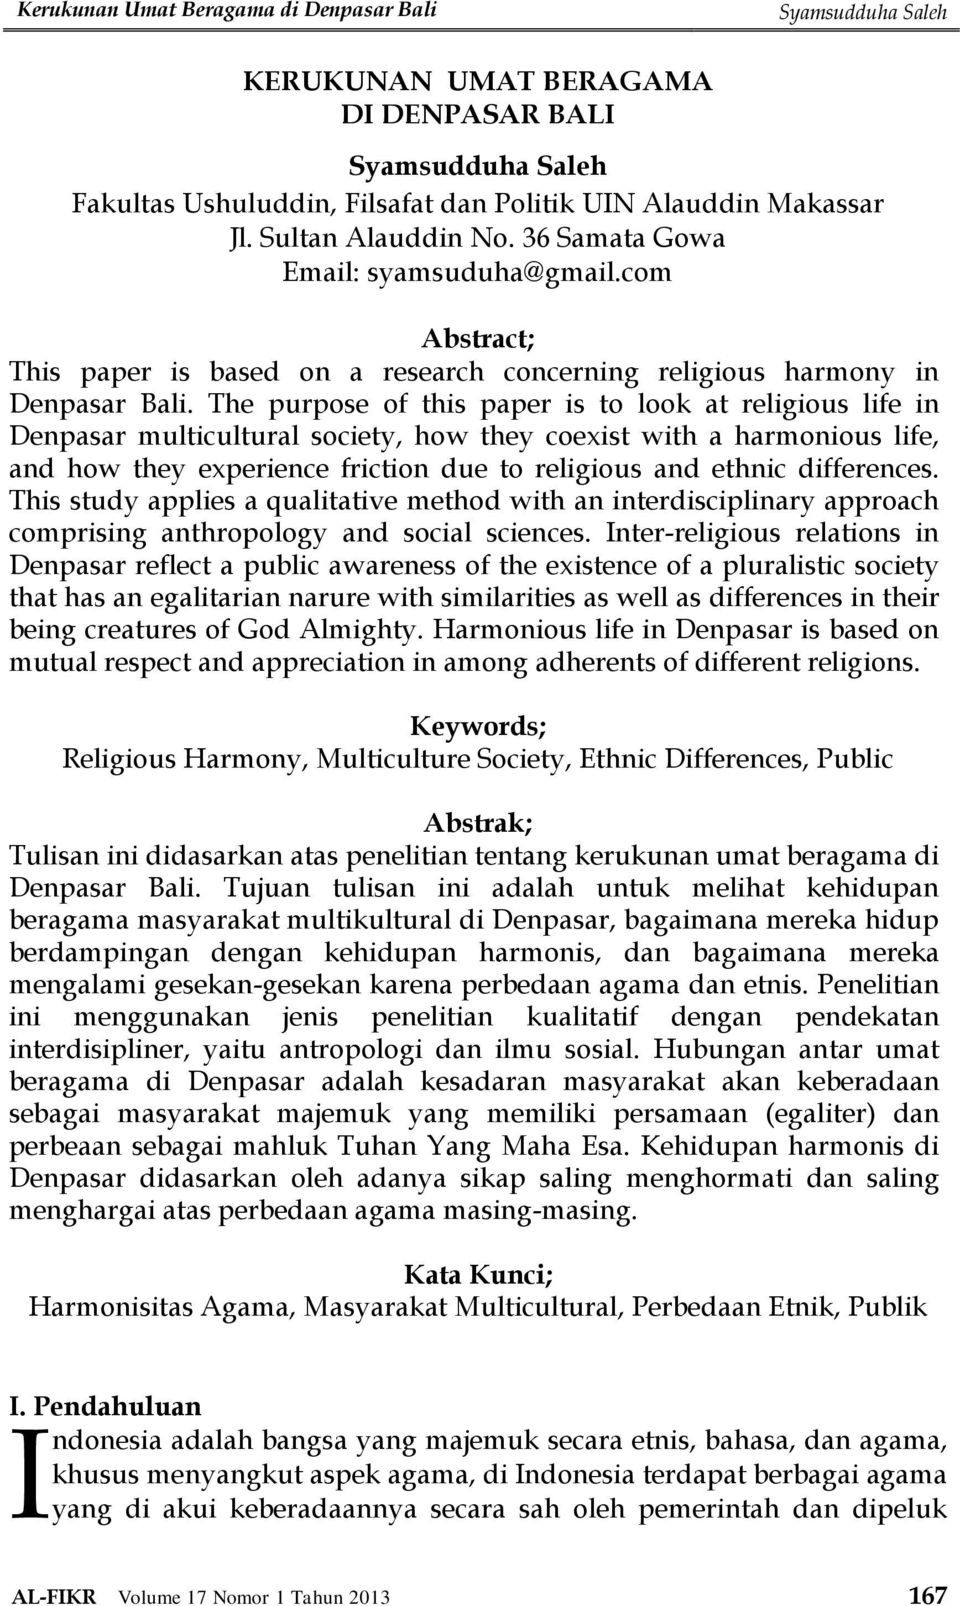 The purpose of this paper is to look at religious life in multicultural society, how they coexist with a harmonious life, and how they experience friction due to religious and ethnic differences.